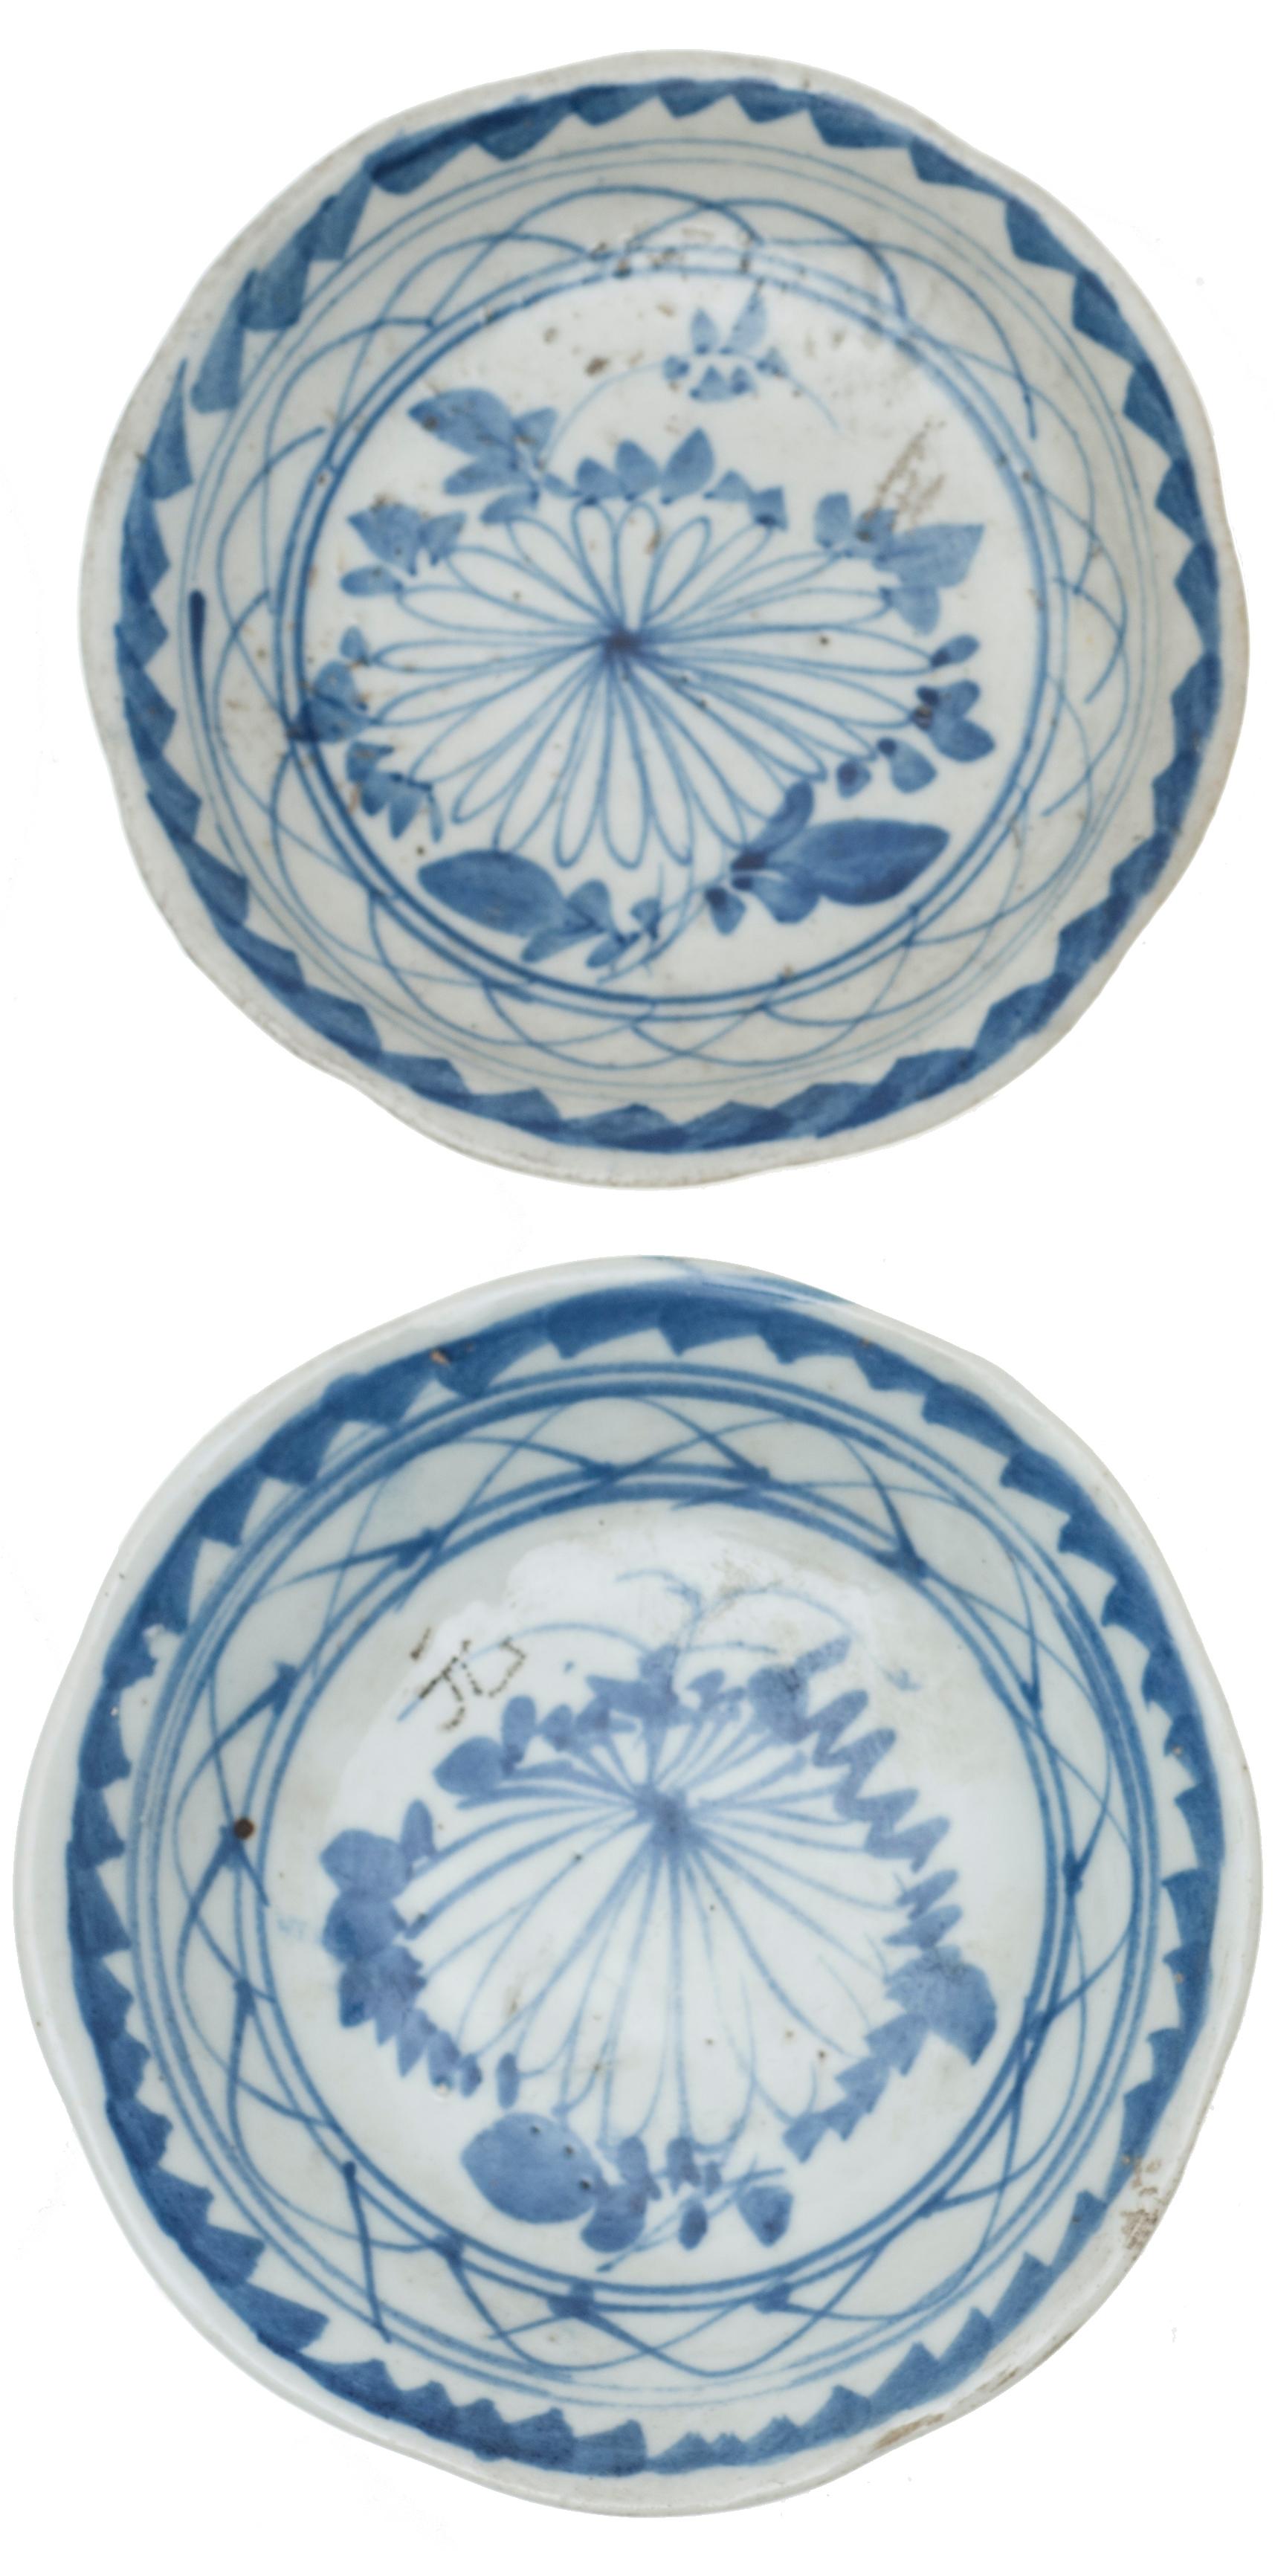 ancient chinese porcelain plates